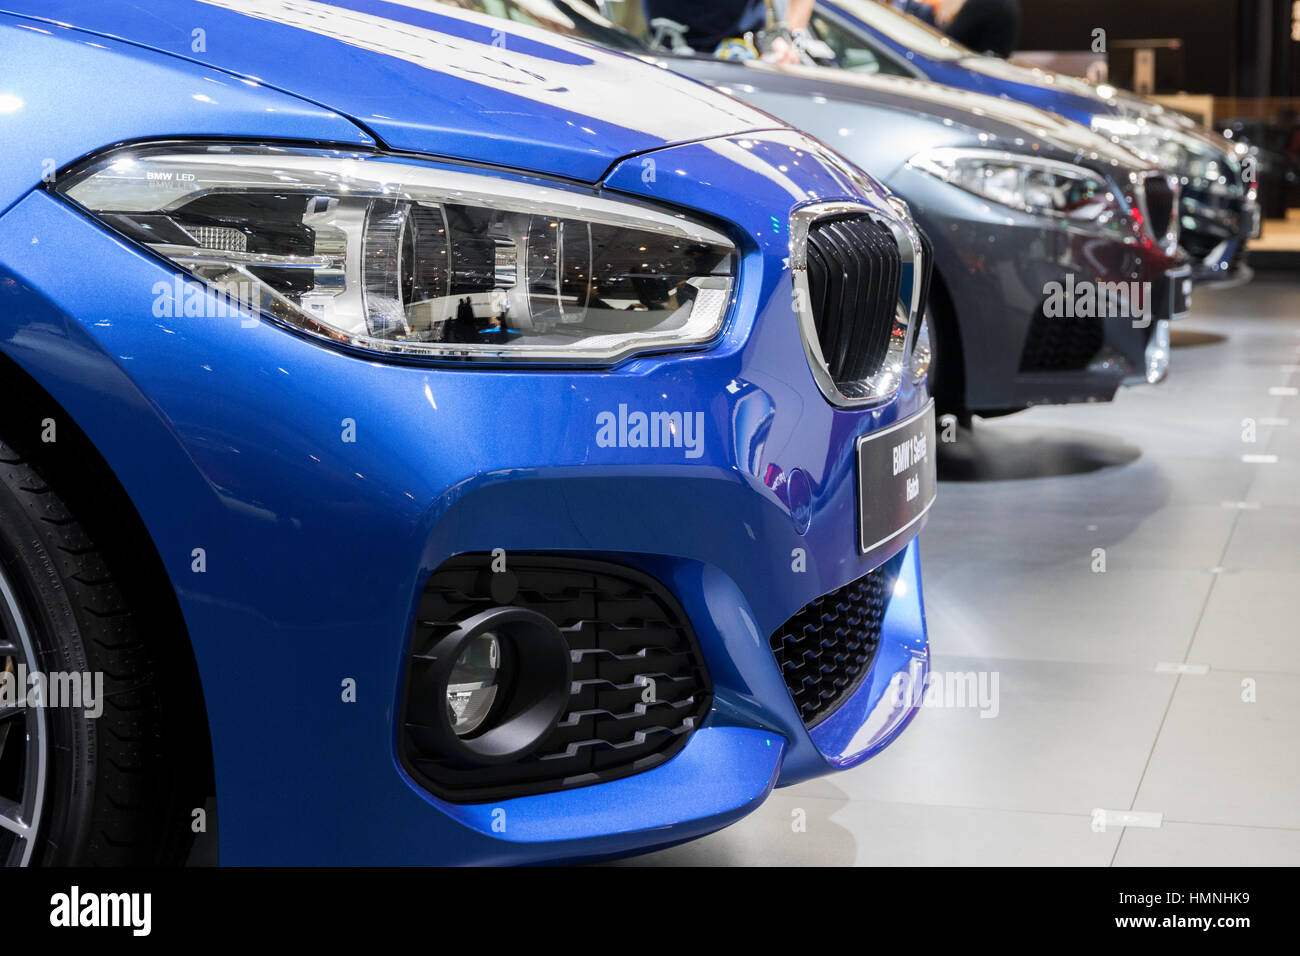 BRUSSELS - JAN 19, 2017: Row of new BMW cars on display at the Motor Show Brussels. Stock Photo